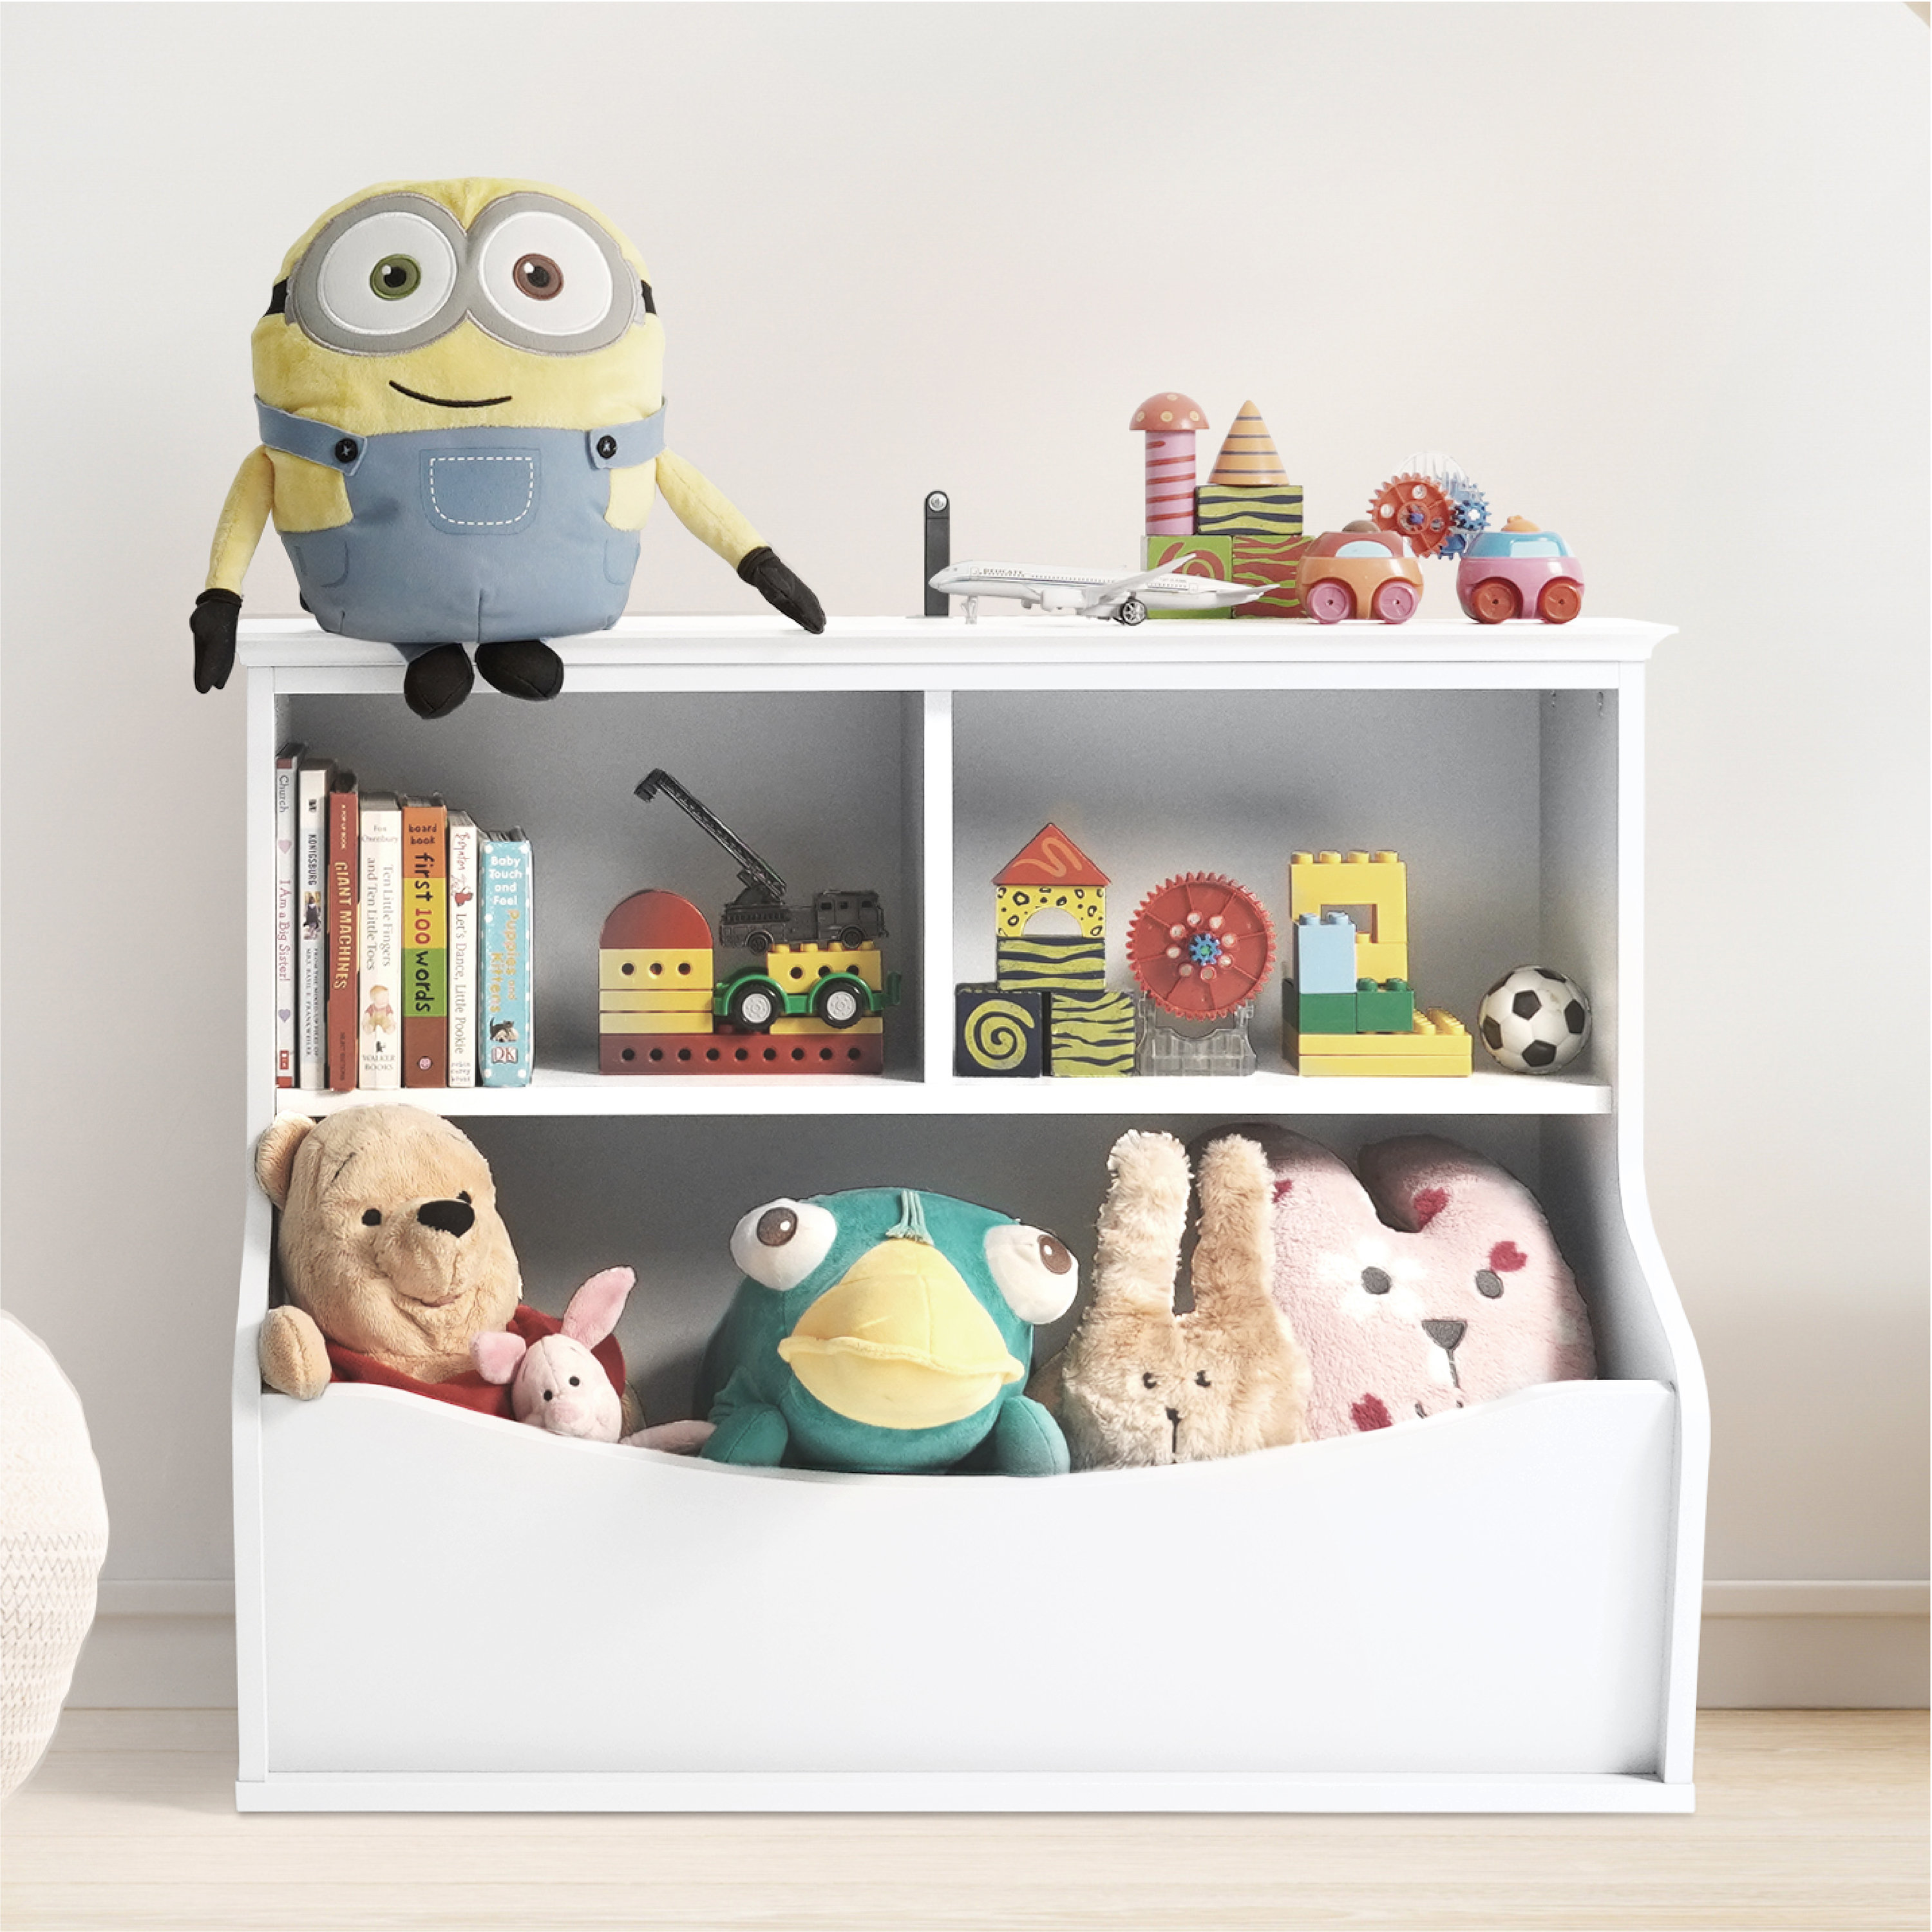 Bins & Things Toy Storage Organizer and Display Case Compatible